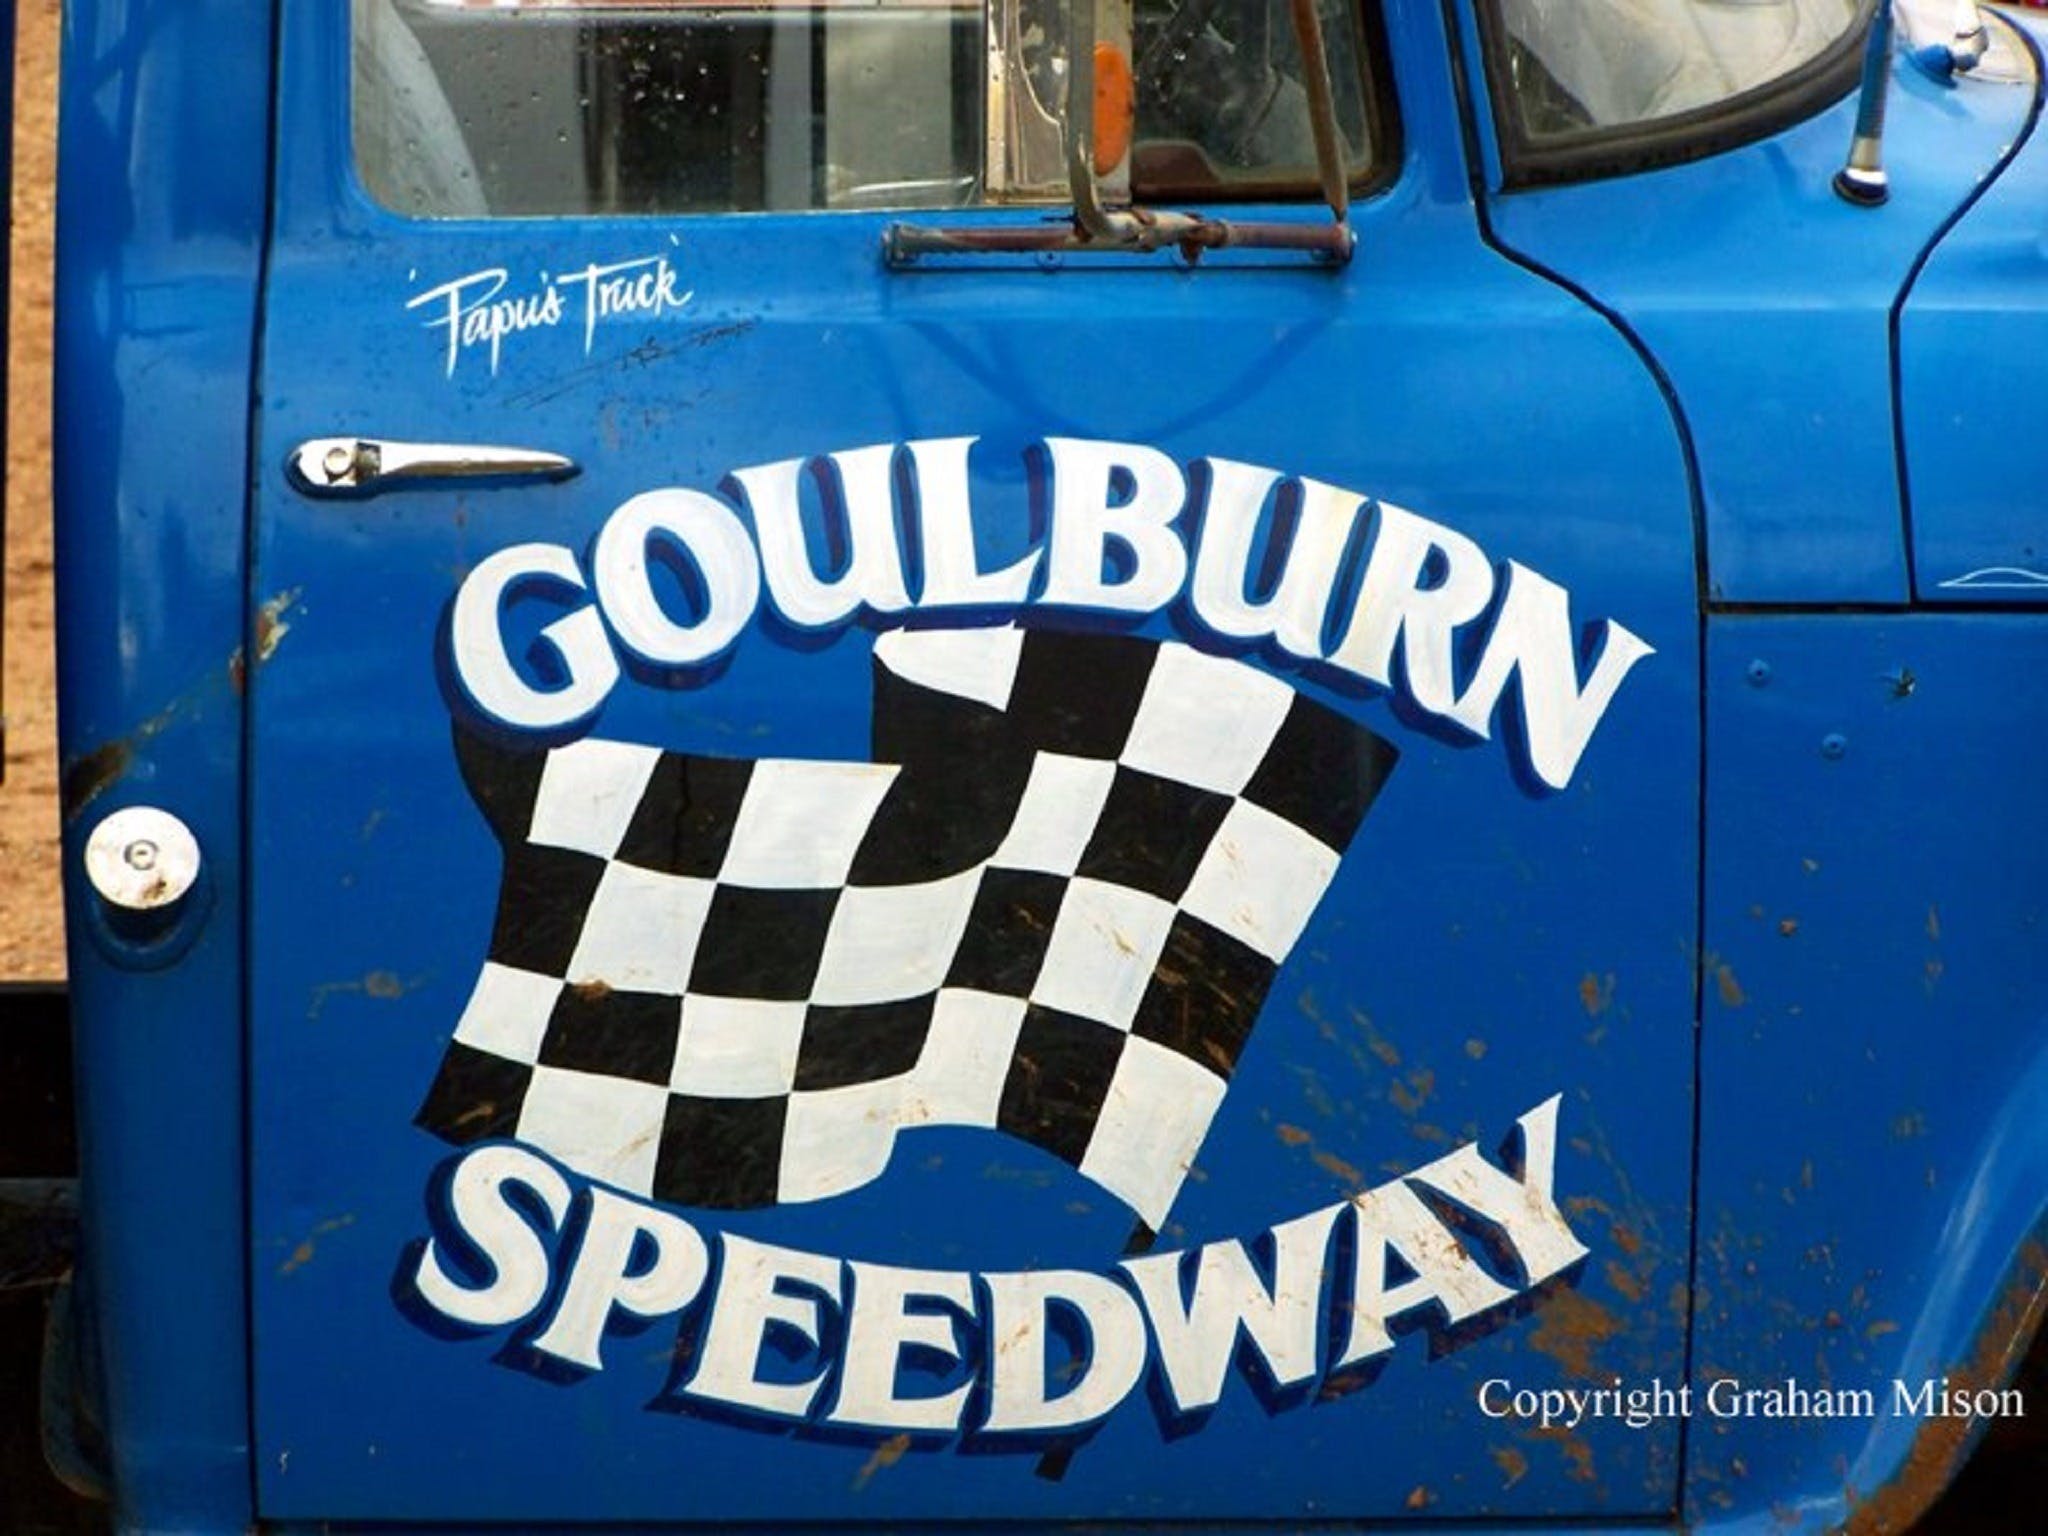 50 years of racing at Goulburn Speedway - Lismore Accommodation